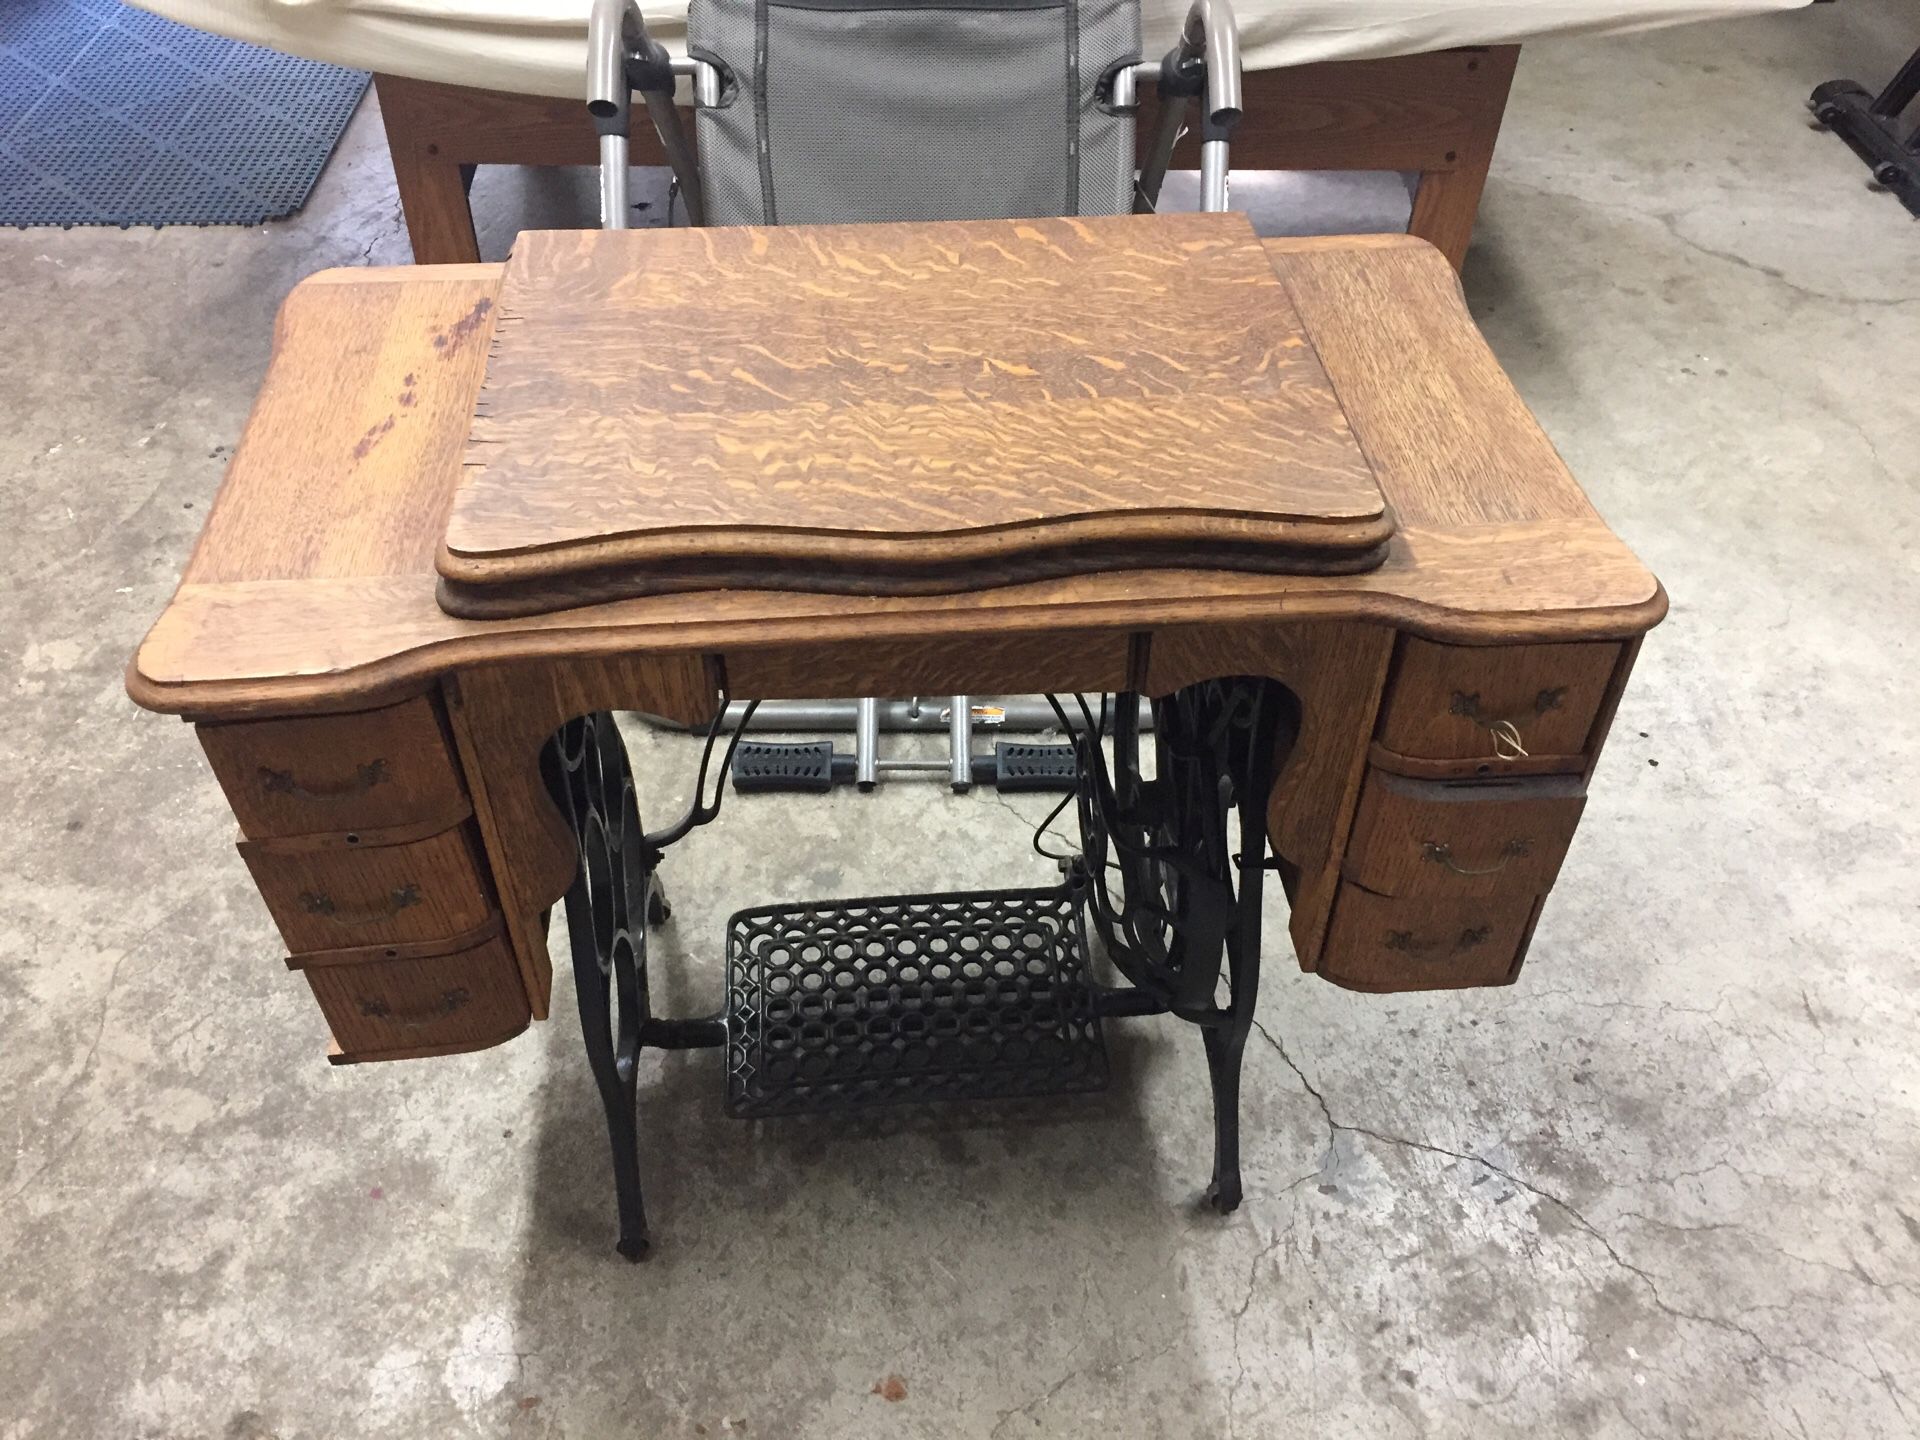 Antique sewing machine furniture only.